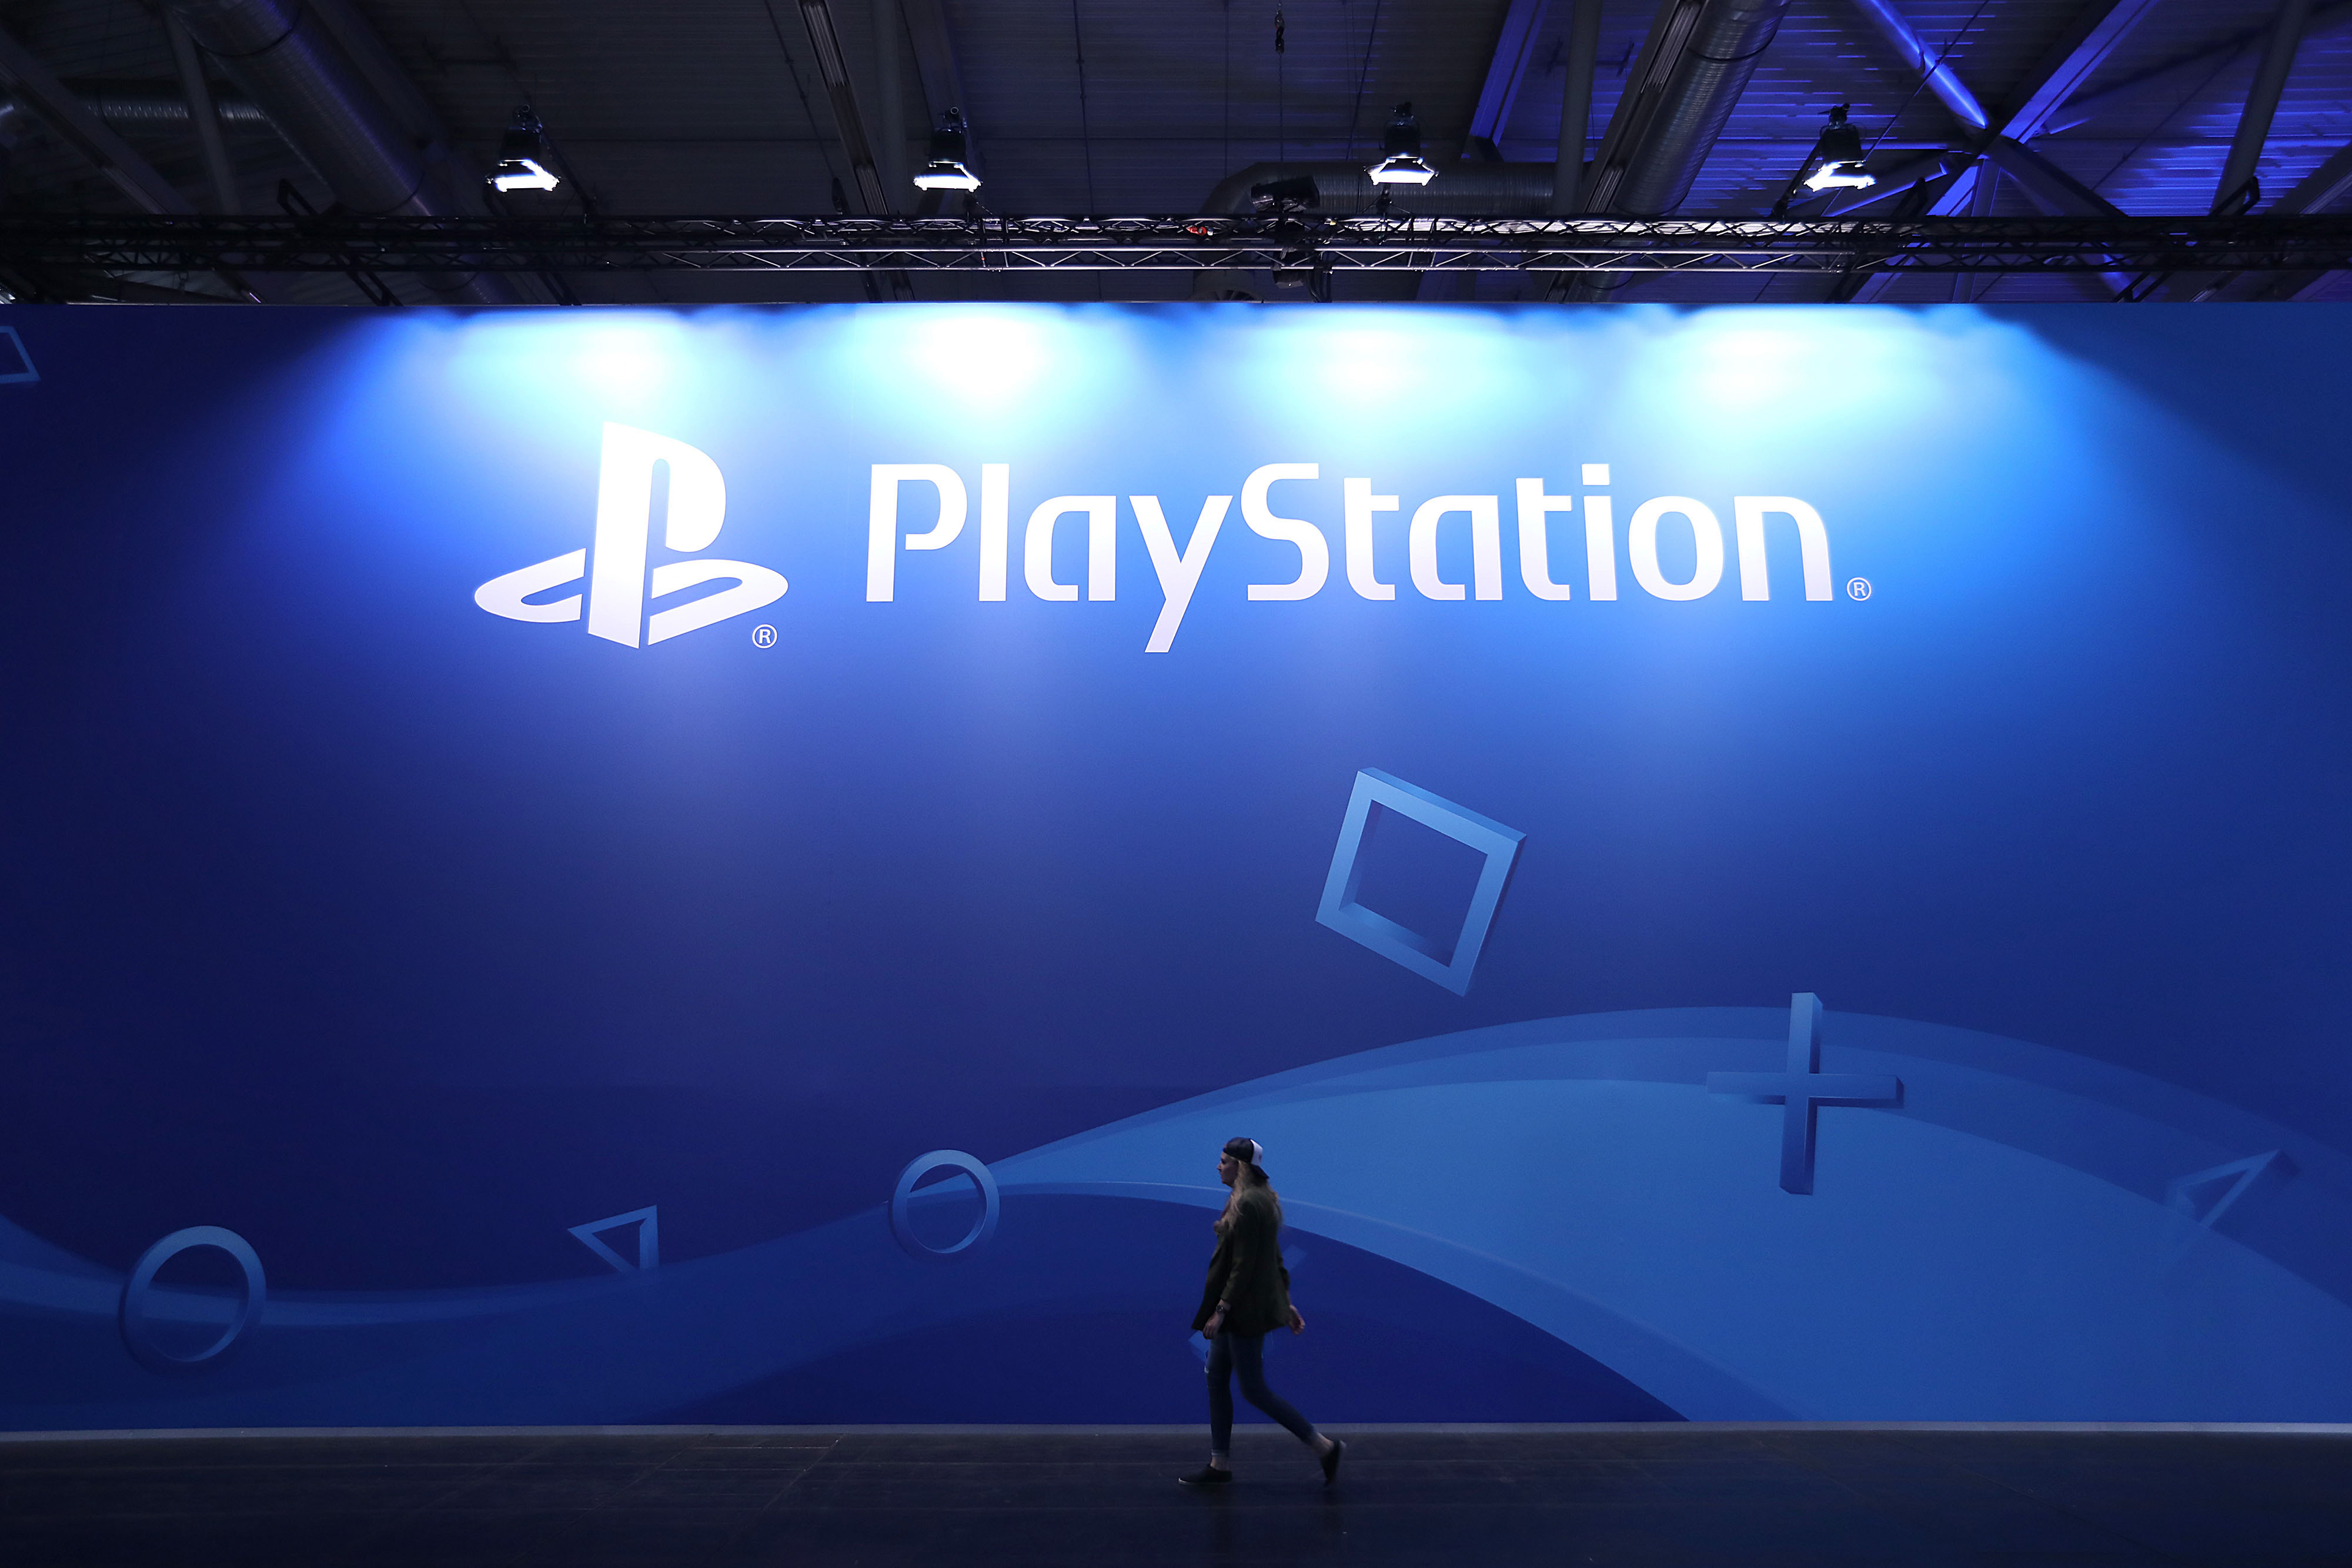 PlayStation Pass Rival From Debut - Bloomberg